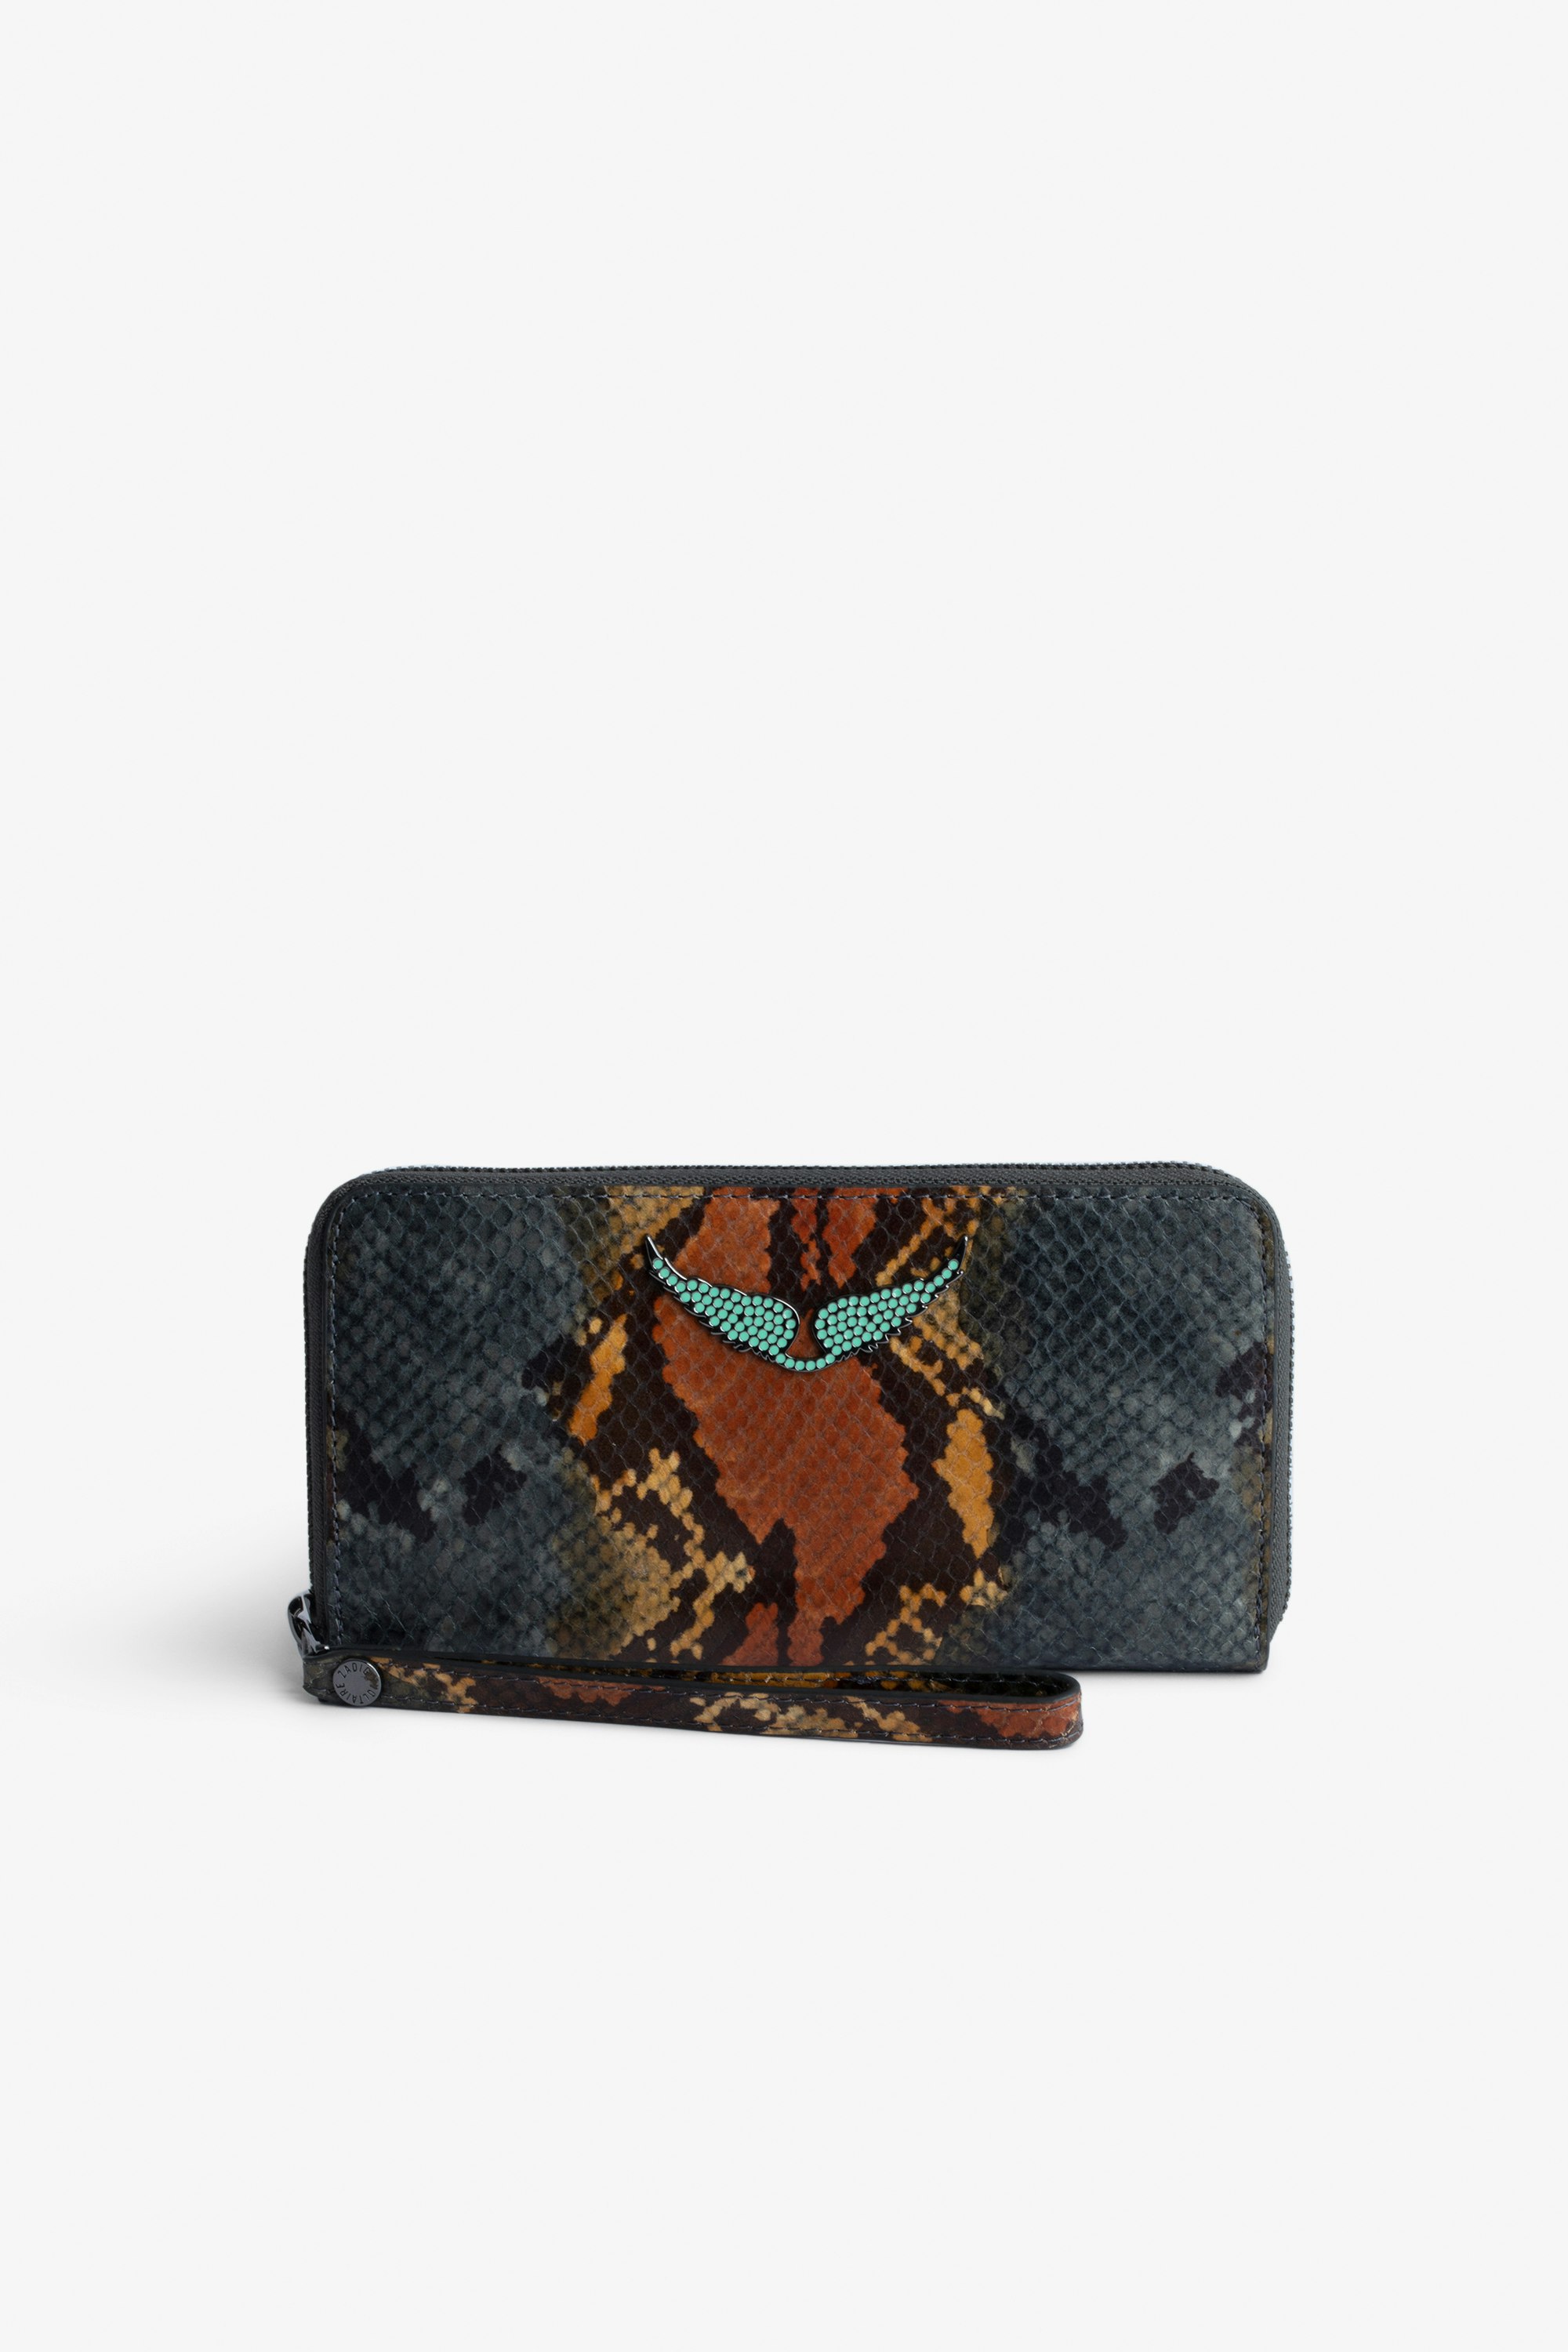 Compagnon Wallet Women's wallet in brown python-effect leather